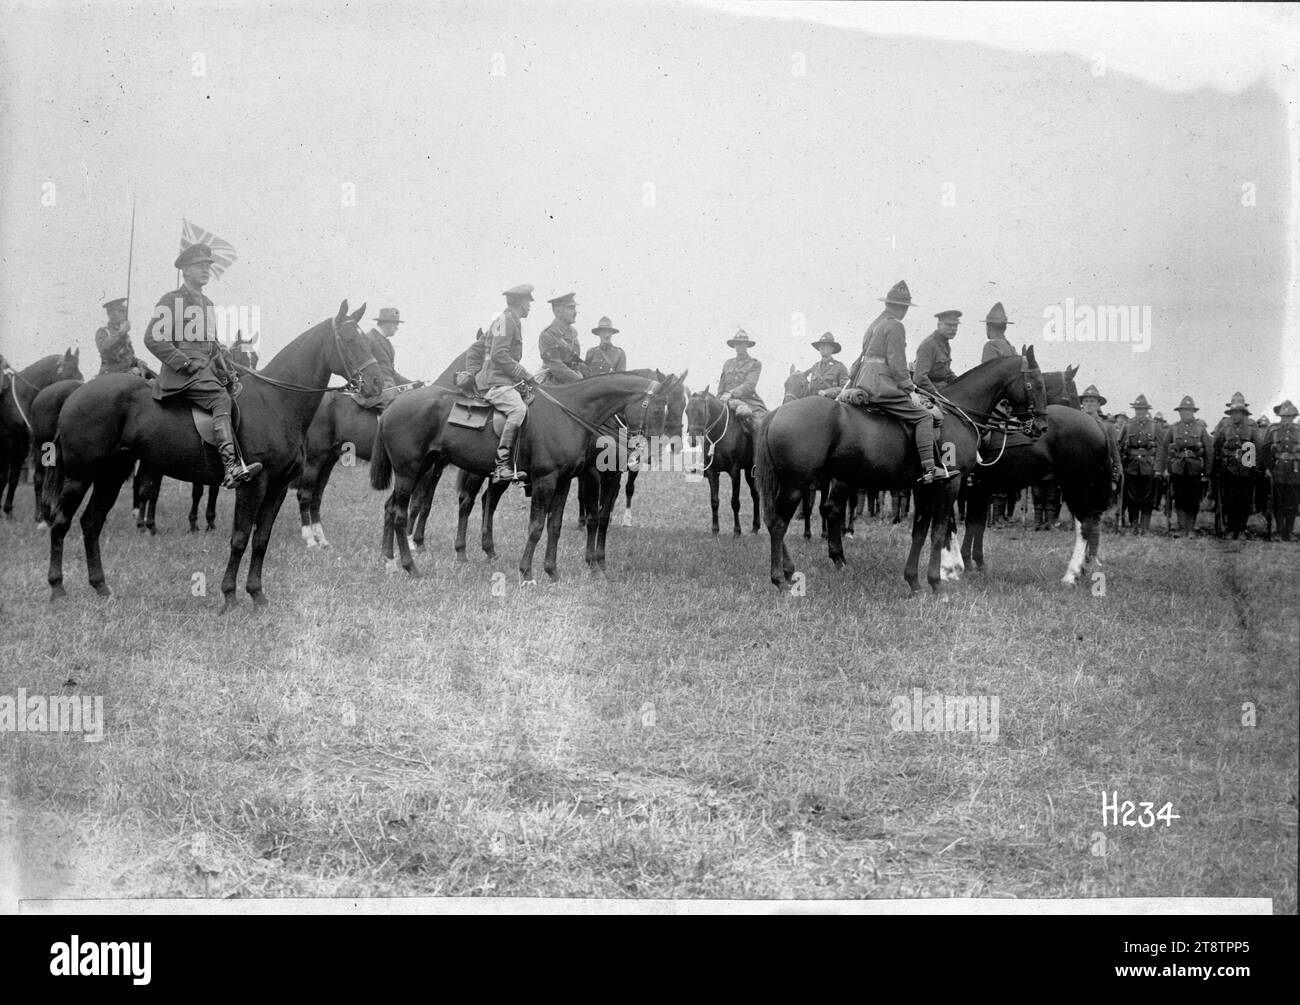 The Commander in Chief reviewing New Zealand troops, The Commander in Chief, General Haig (on a horse second from right) with the Commander of New Zealand troops, General Russell, and other officers on the review ground. Winston Churchill is in the background. Photograph taken 14 September 1917 Stock Photo